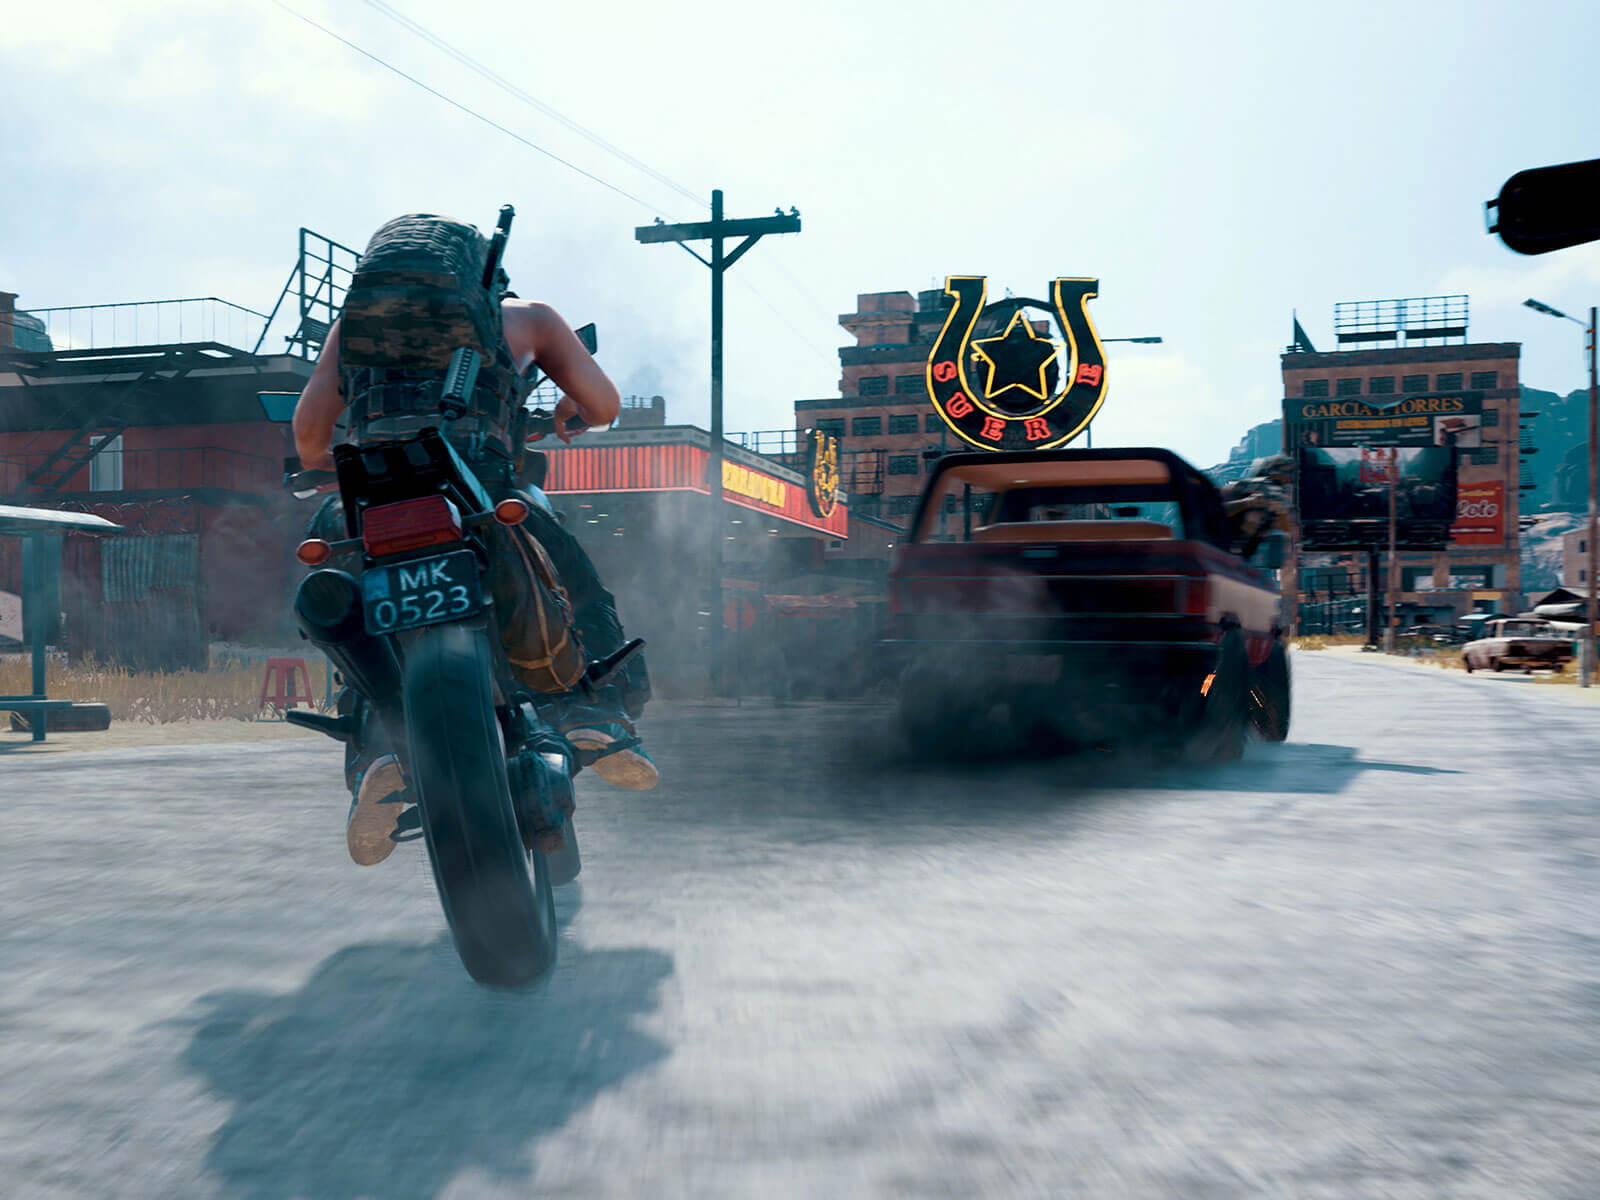 A player on a motorcycle chases a smoking truck down a western themed street